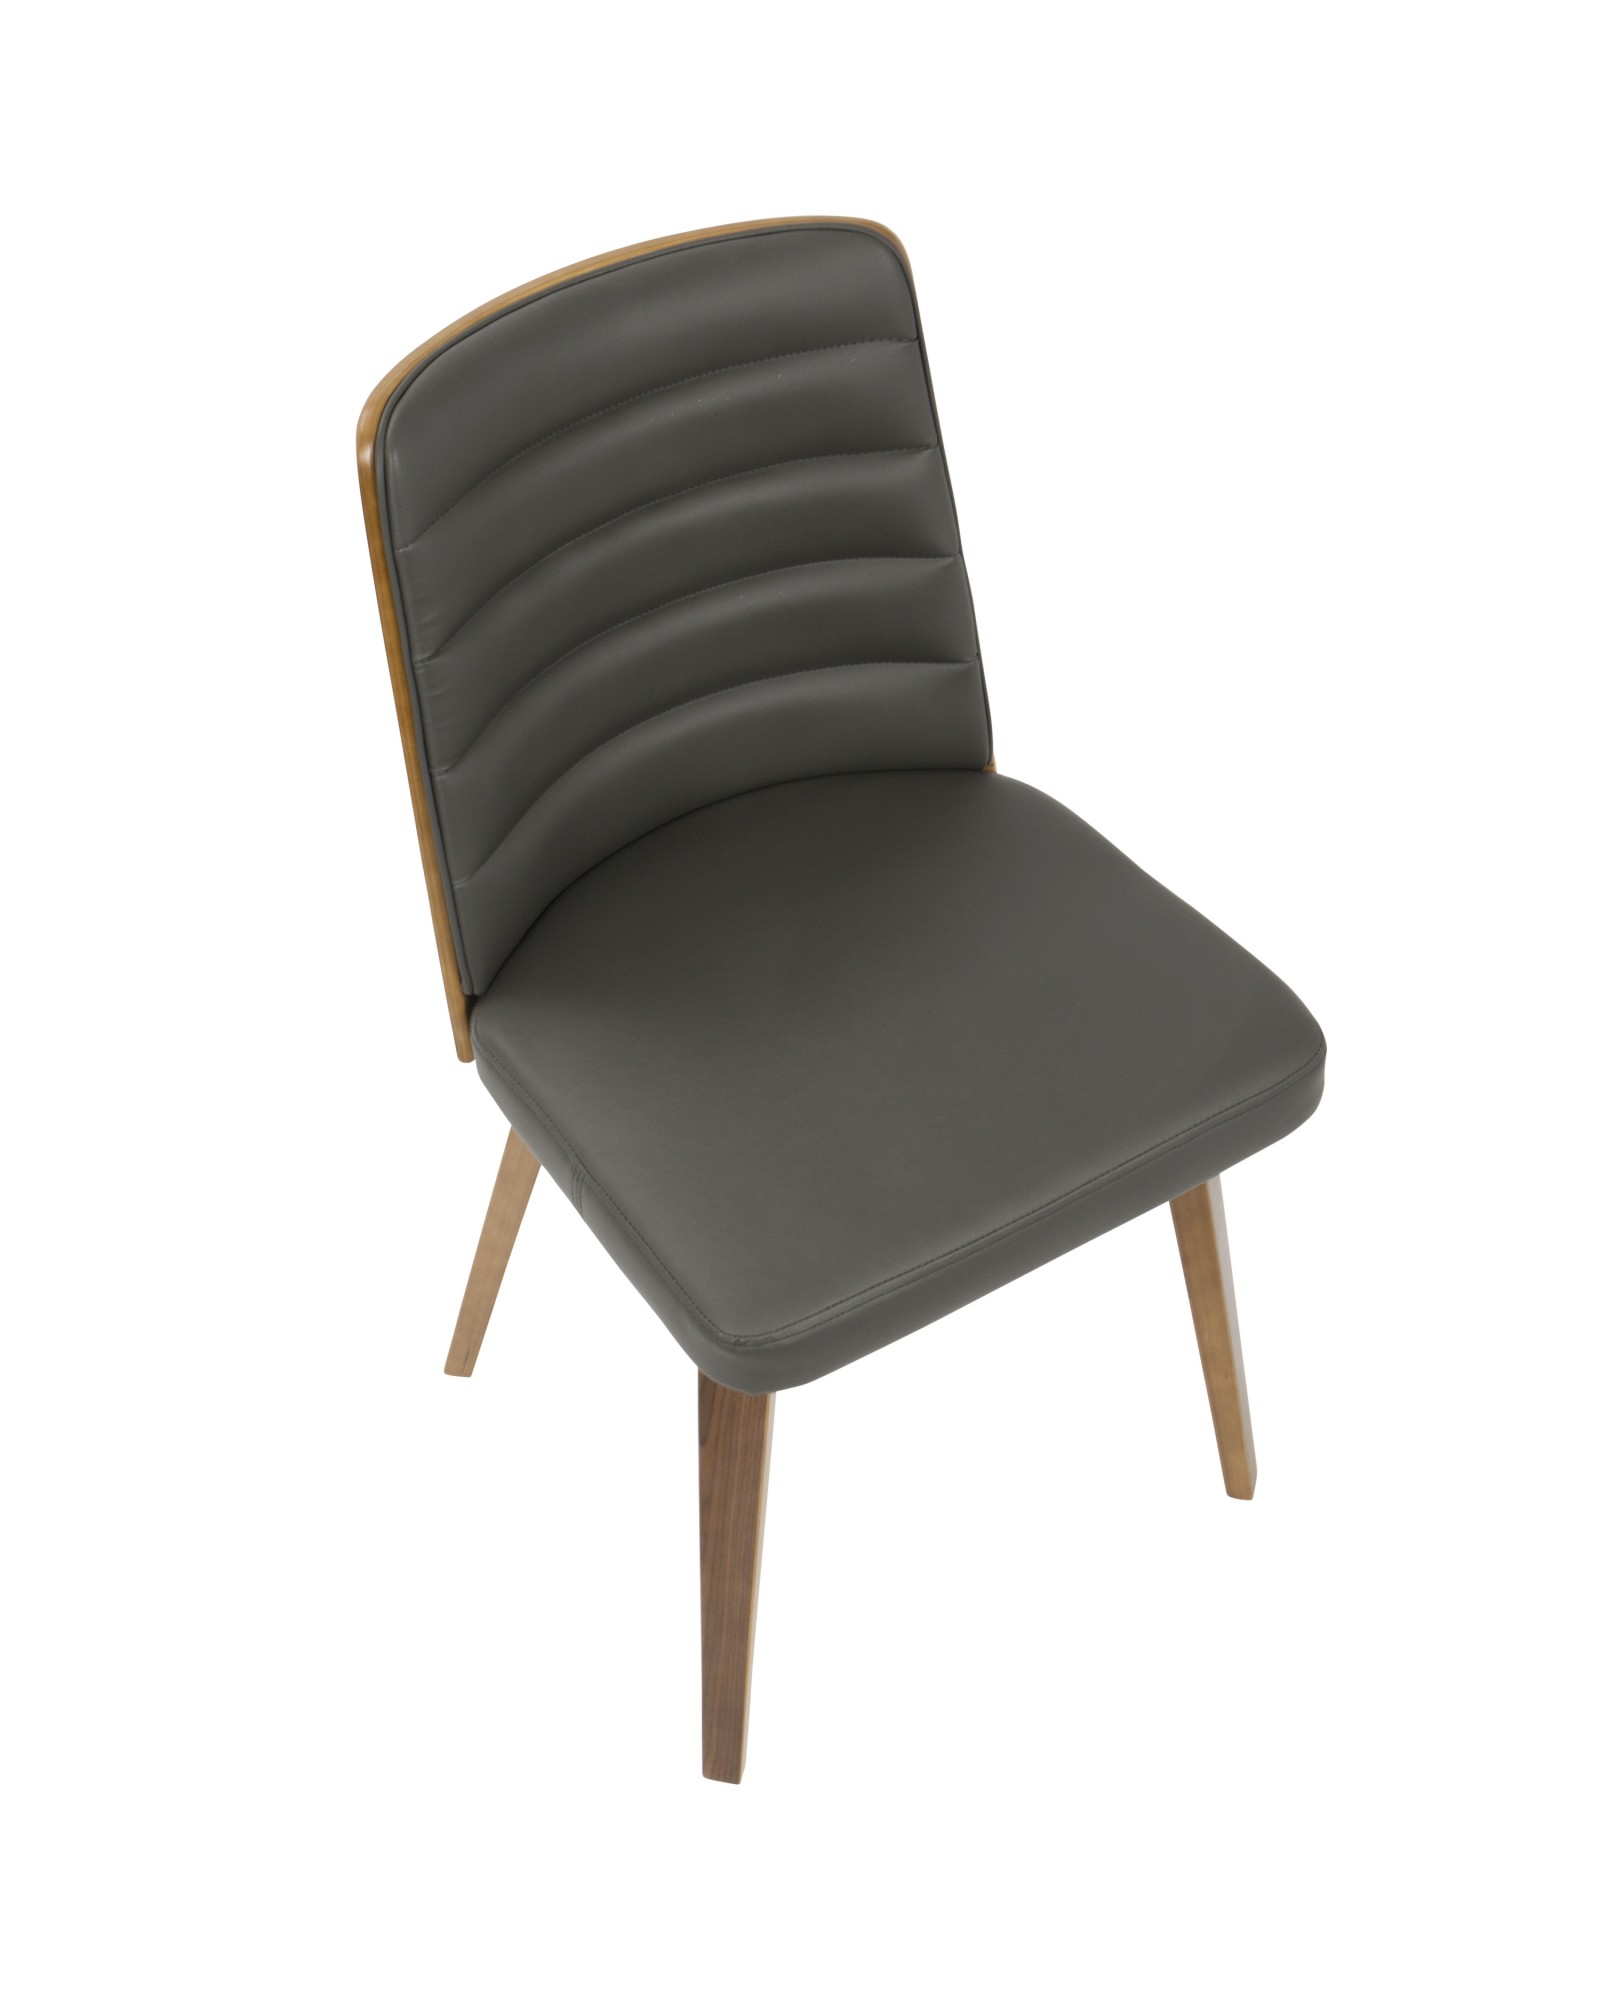 Francesca Mid-Century Modern Dining/Accent Chair in Walnut Wood and Grey Faux Leather